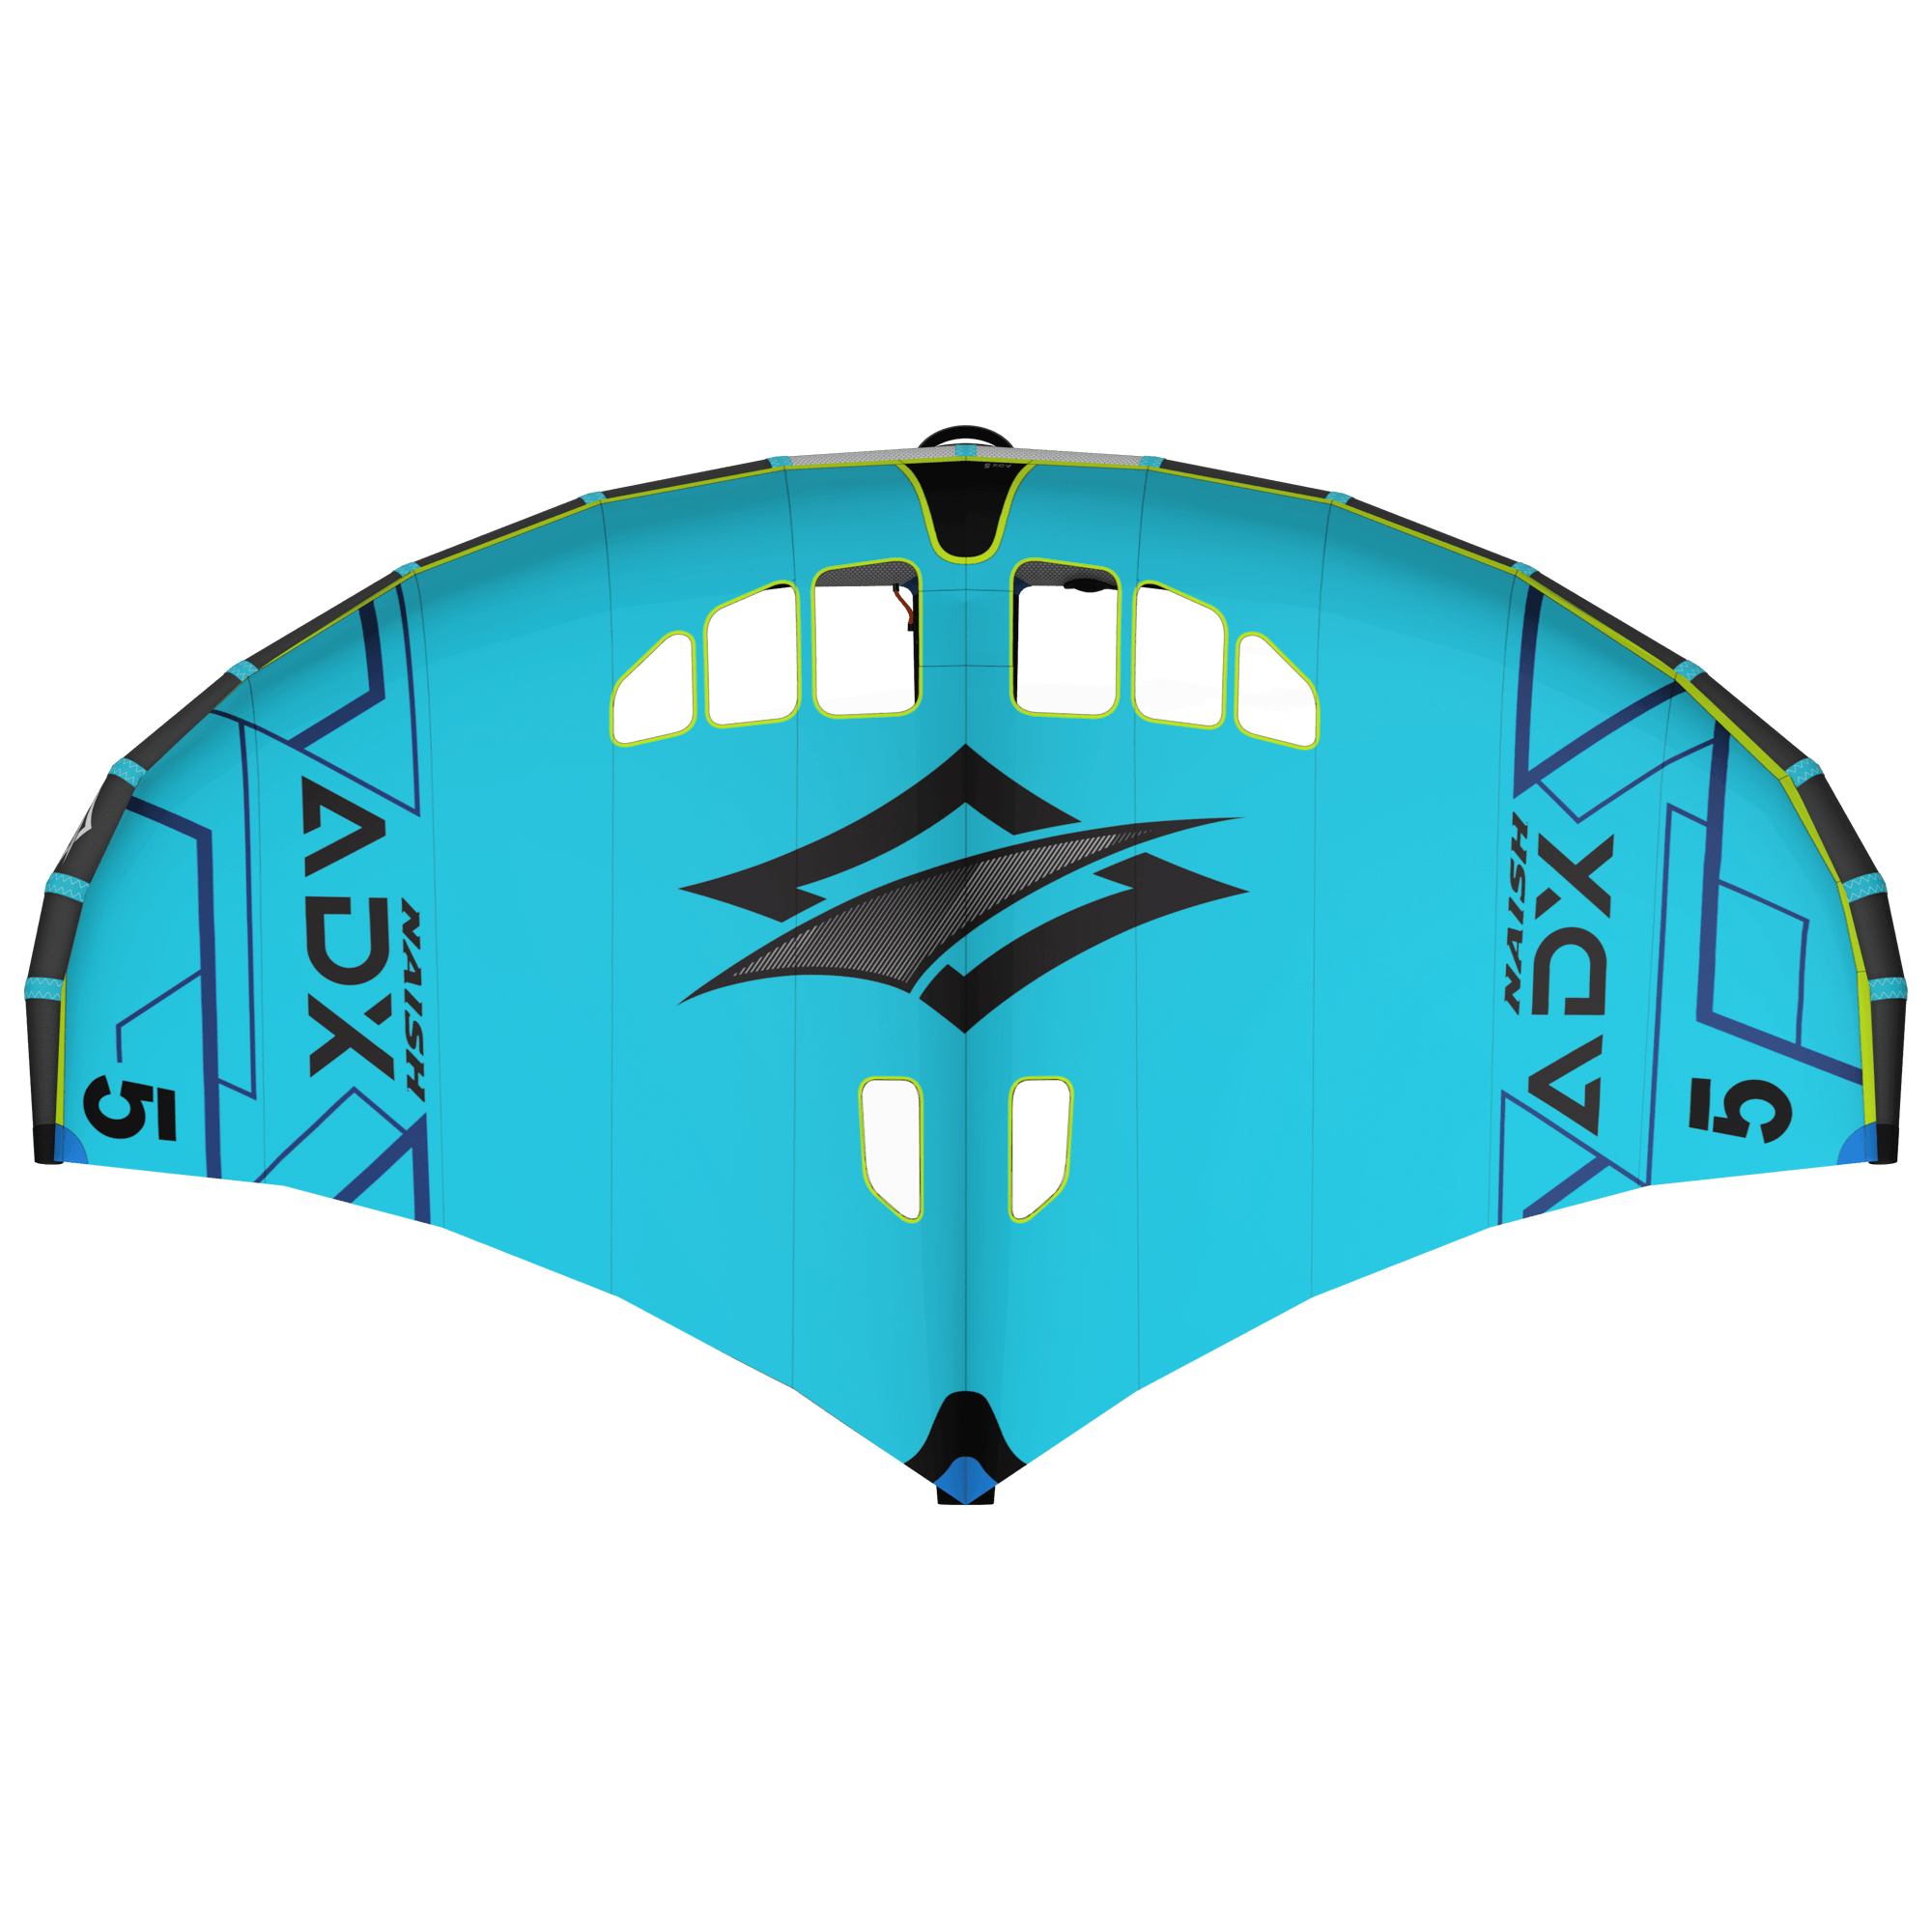 Wing-Surfer ADX